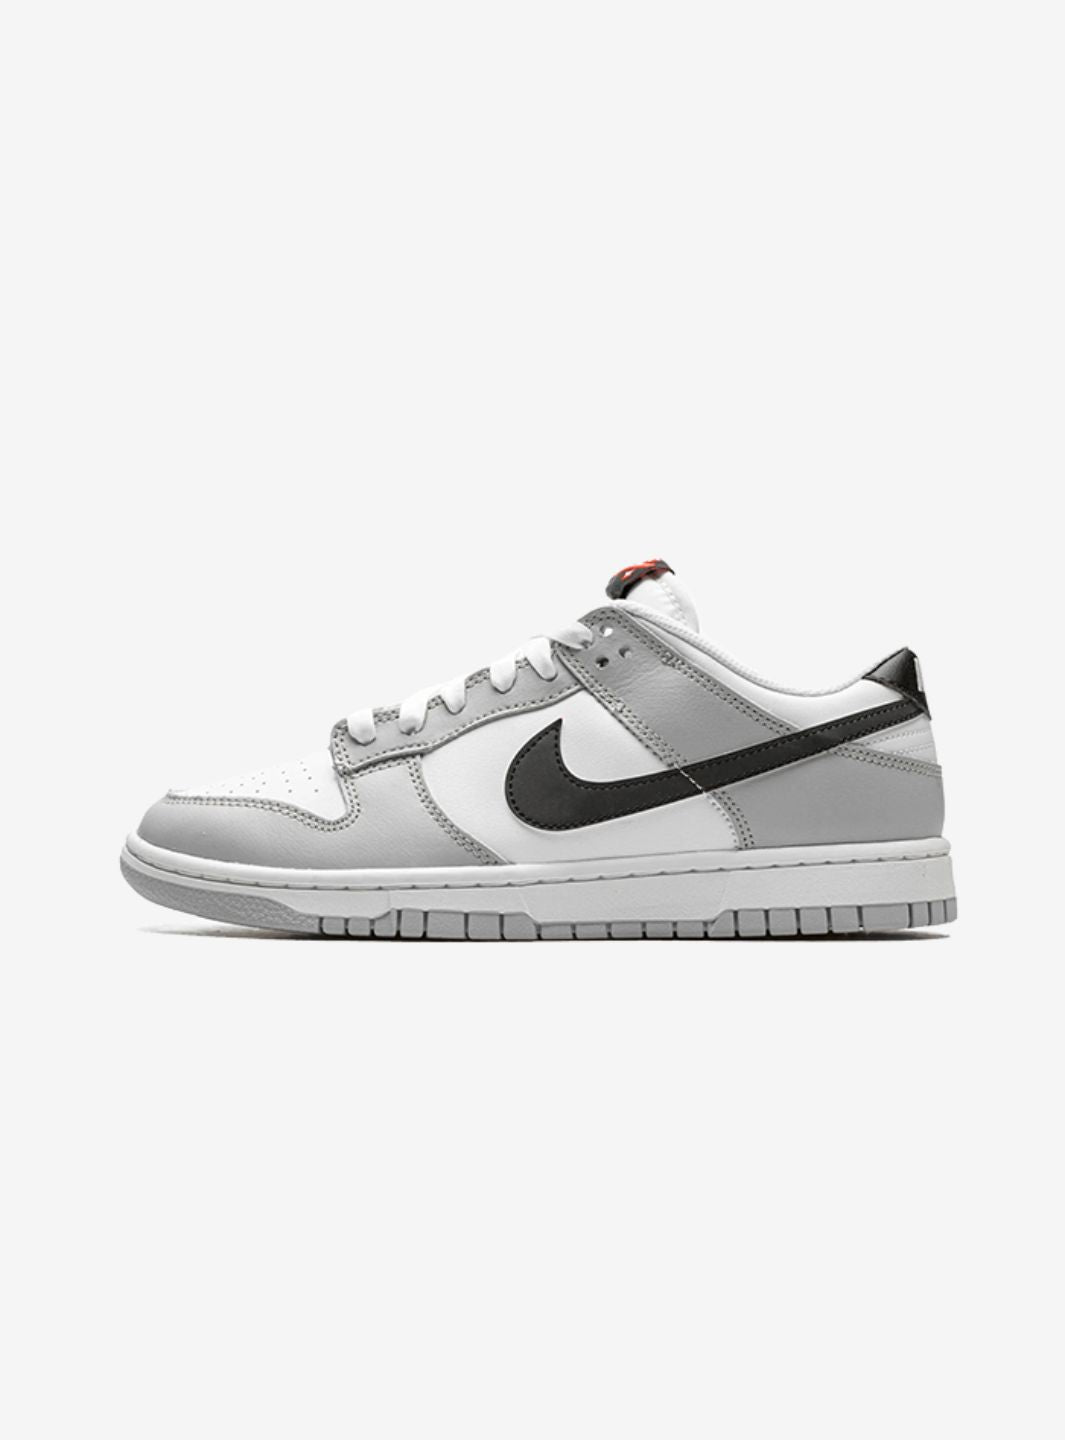 Nike Dunk Low SE Lottery Pack Grey Fog - DR9654-001 | ResellZone